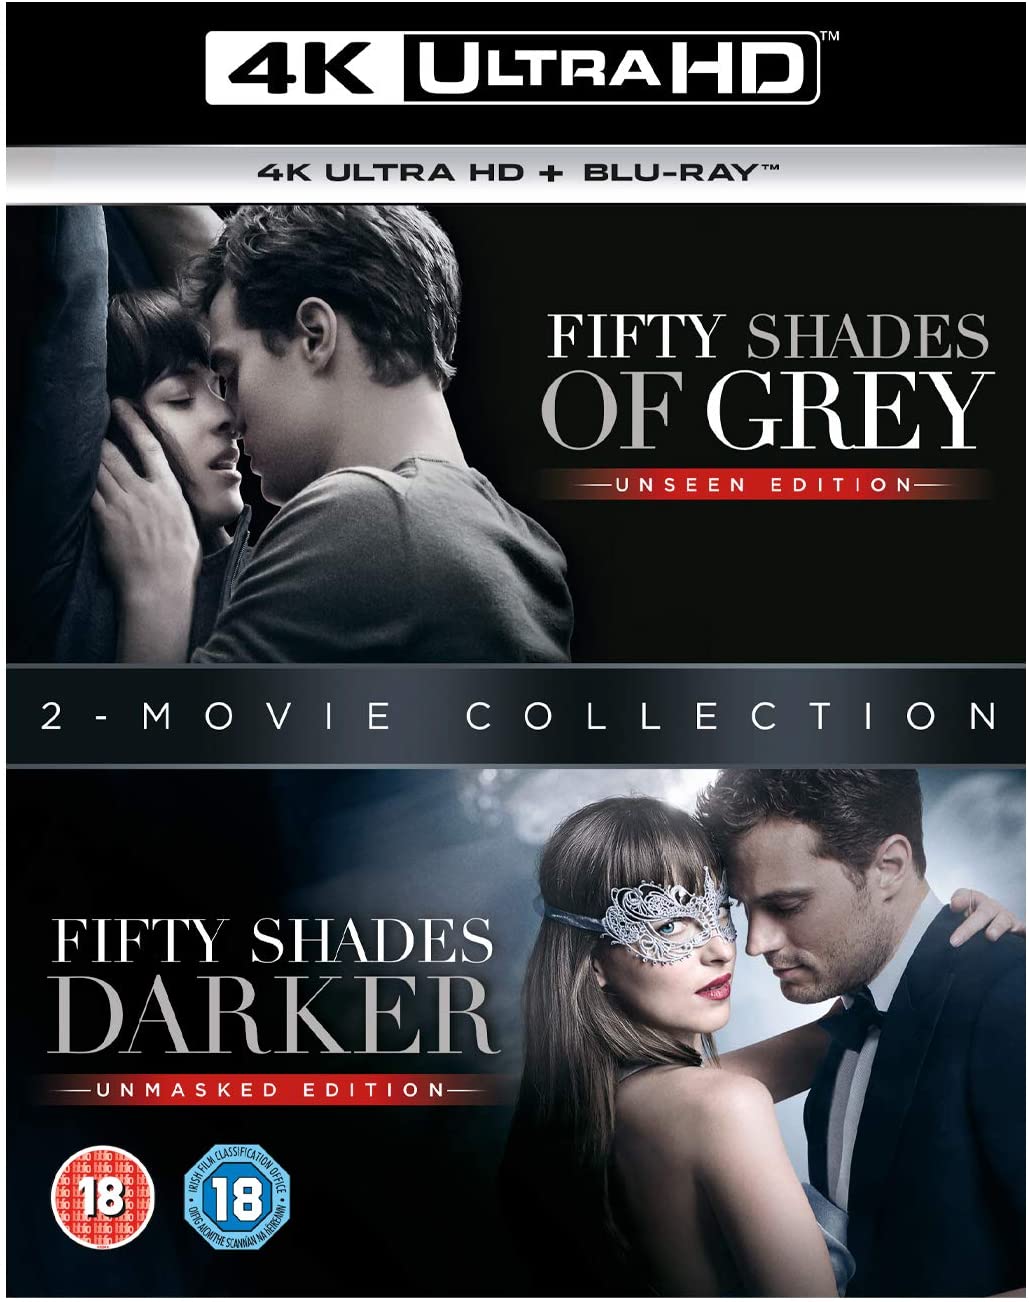 Fifty Shades 2 Film Collection [2017] (4K Ultra HD + Blu-ray)